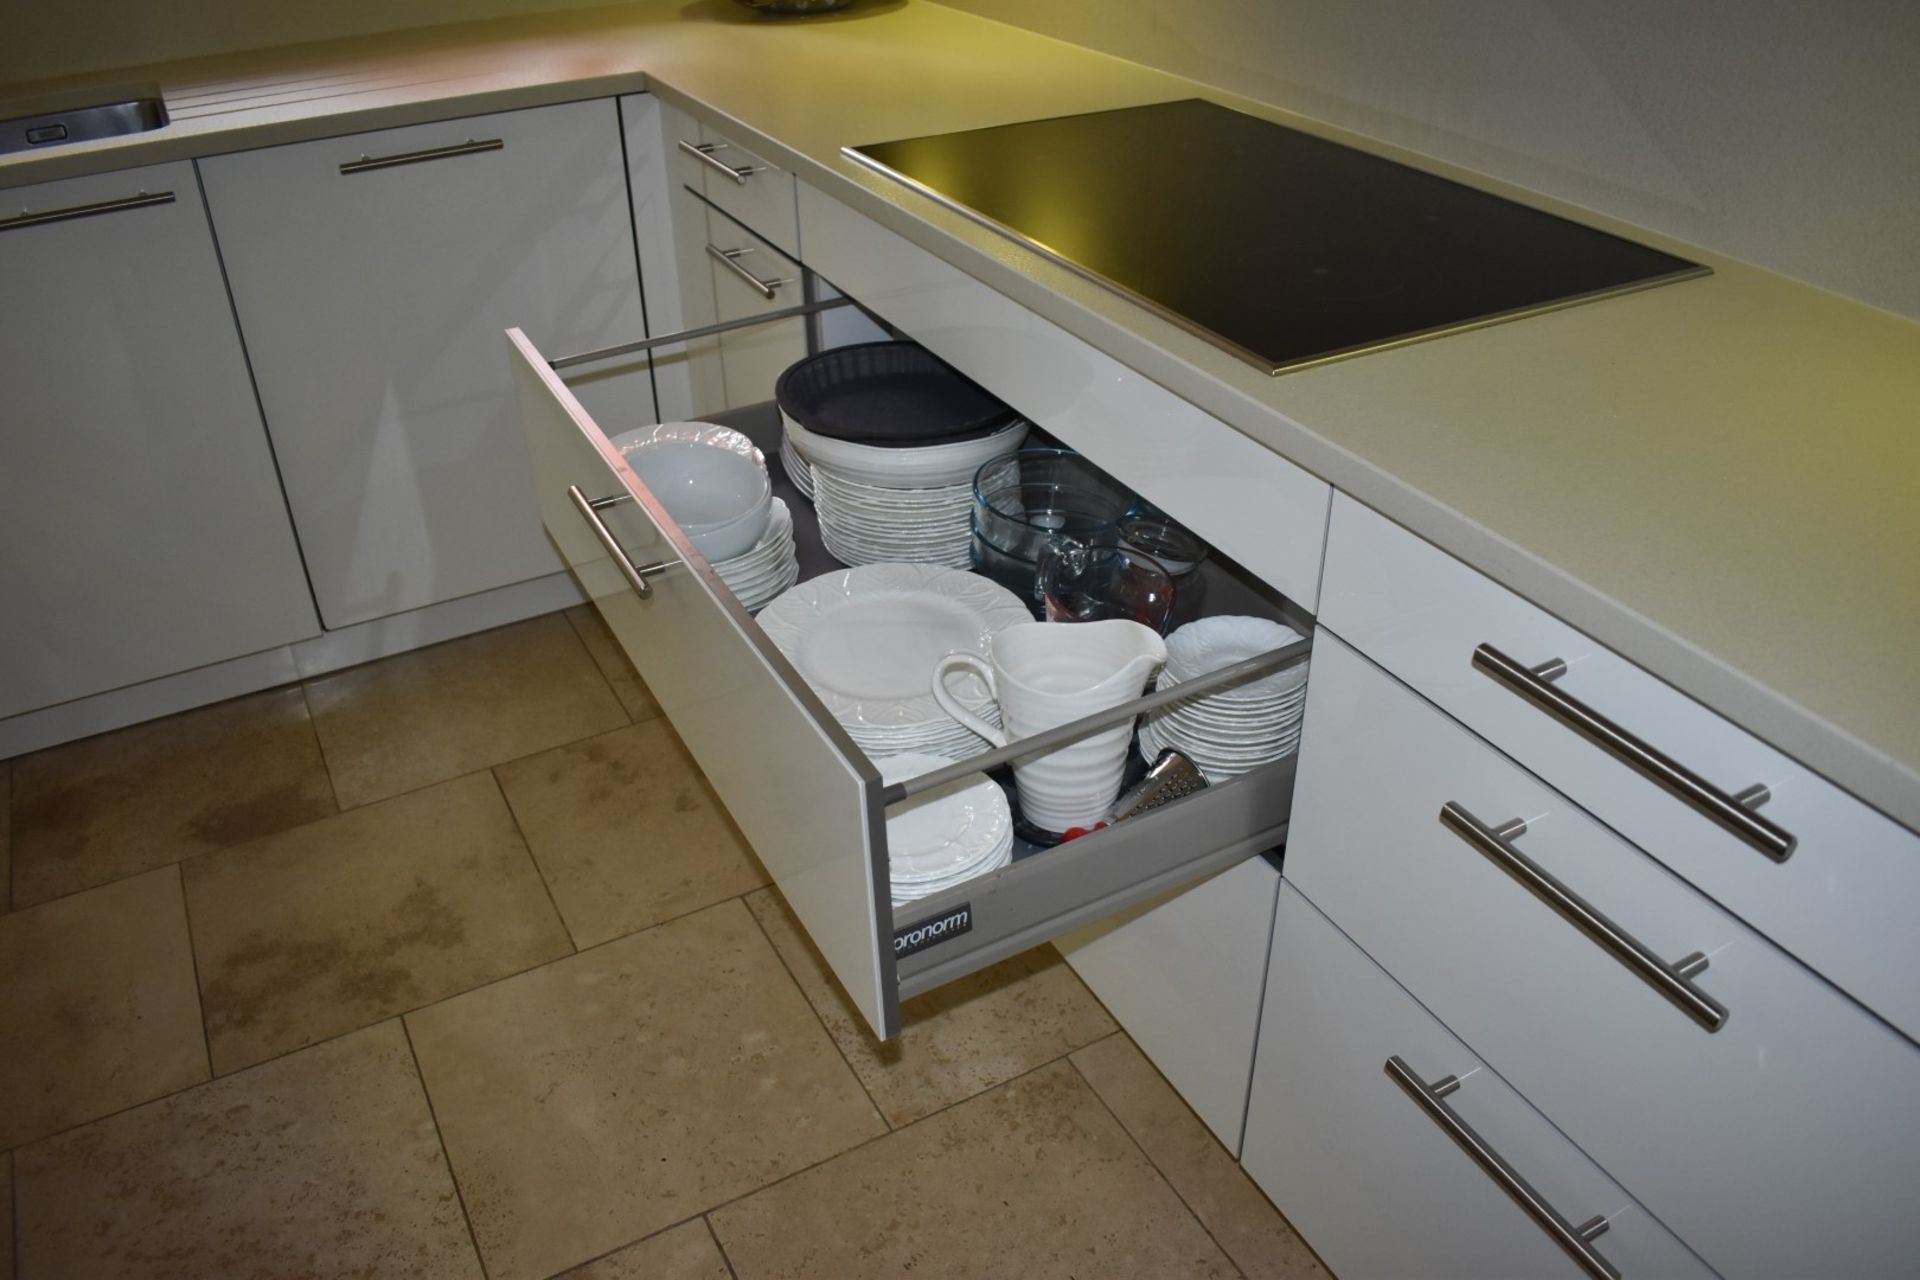 1 x Pronorm Einbauküchen German Made Fitted Kitchen With Contemporary High Gloss Cream Doors and - Image 23 of 50